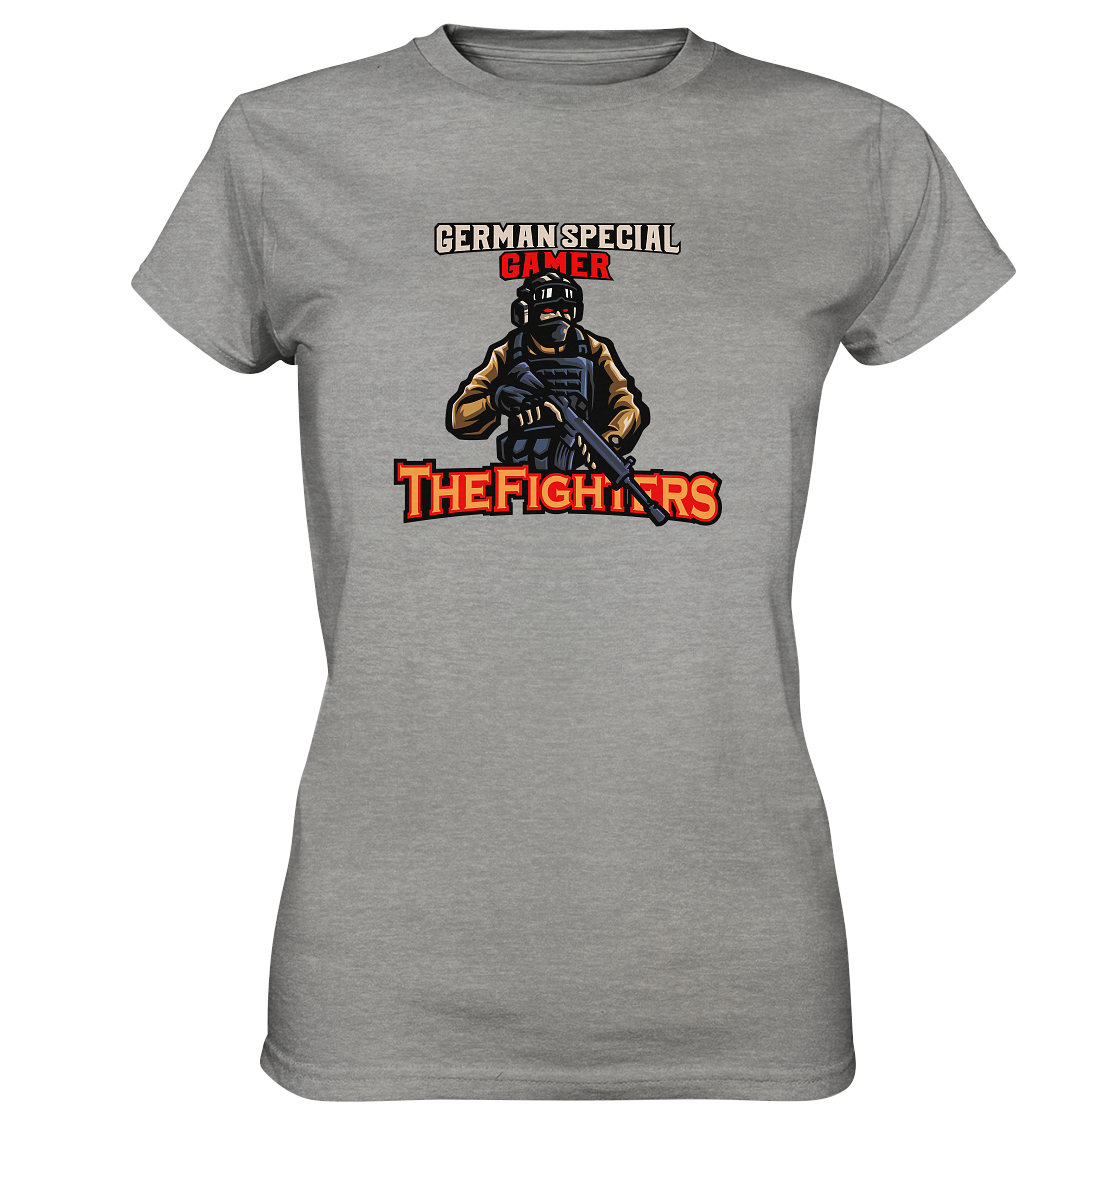 GERMAN SPECIAL GAMER - THE FIGHTERS - Ladies Basic Shirt